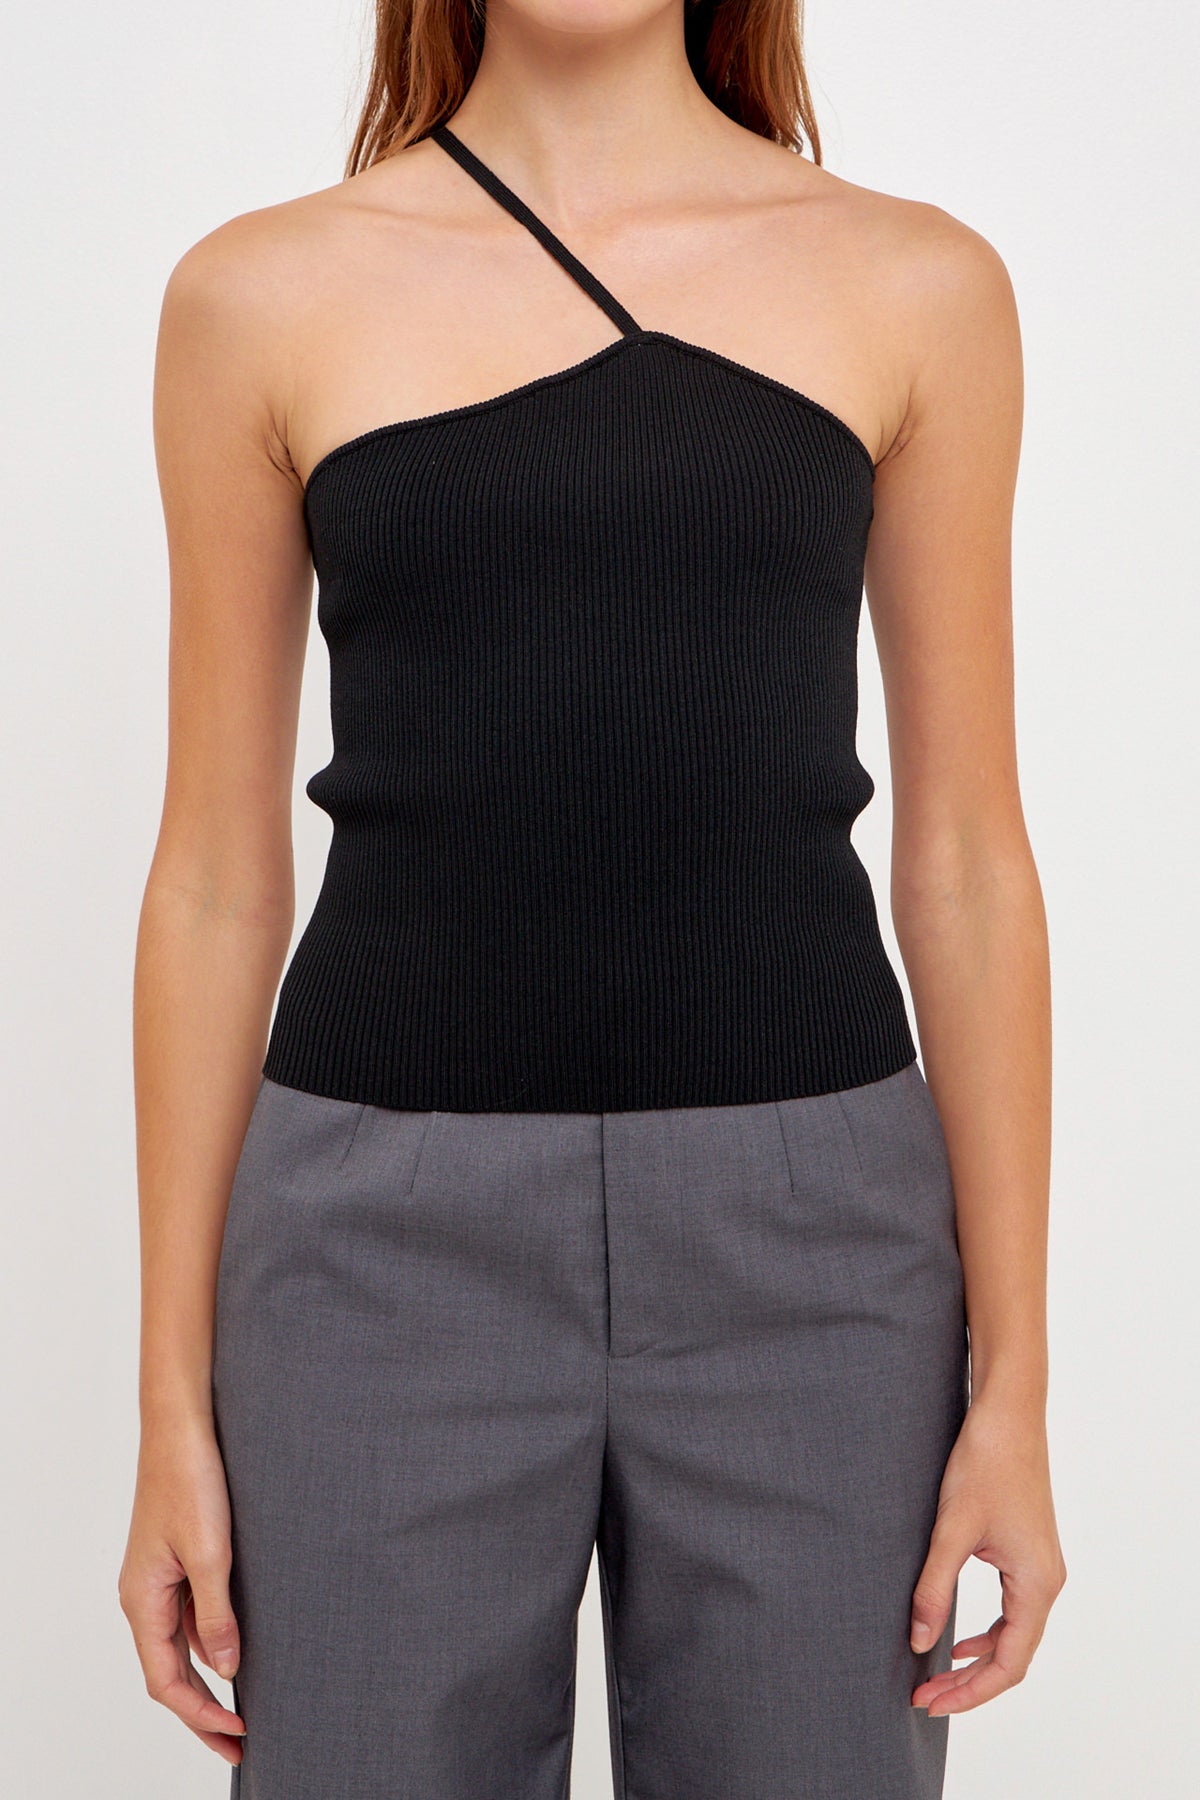 GREY LAB - One Shoulder Strap Knit Tank Top - CAMI TOPS & TANK available at Objectrare